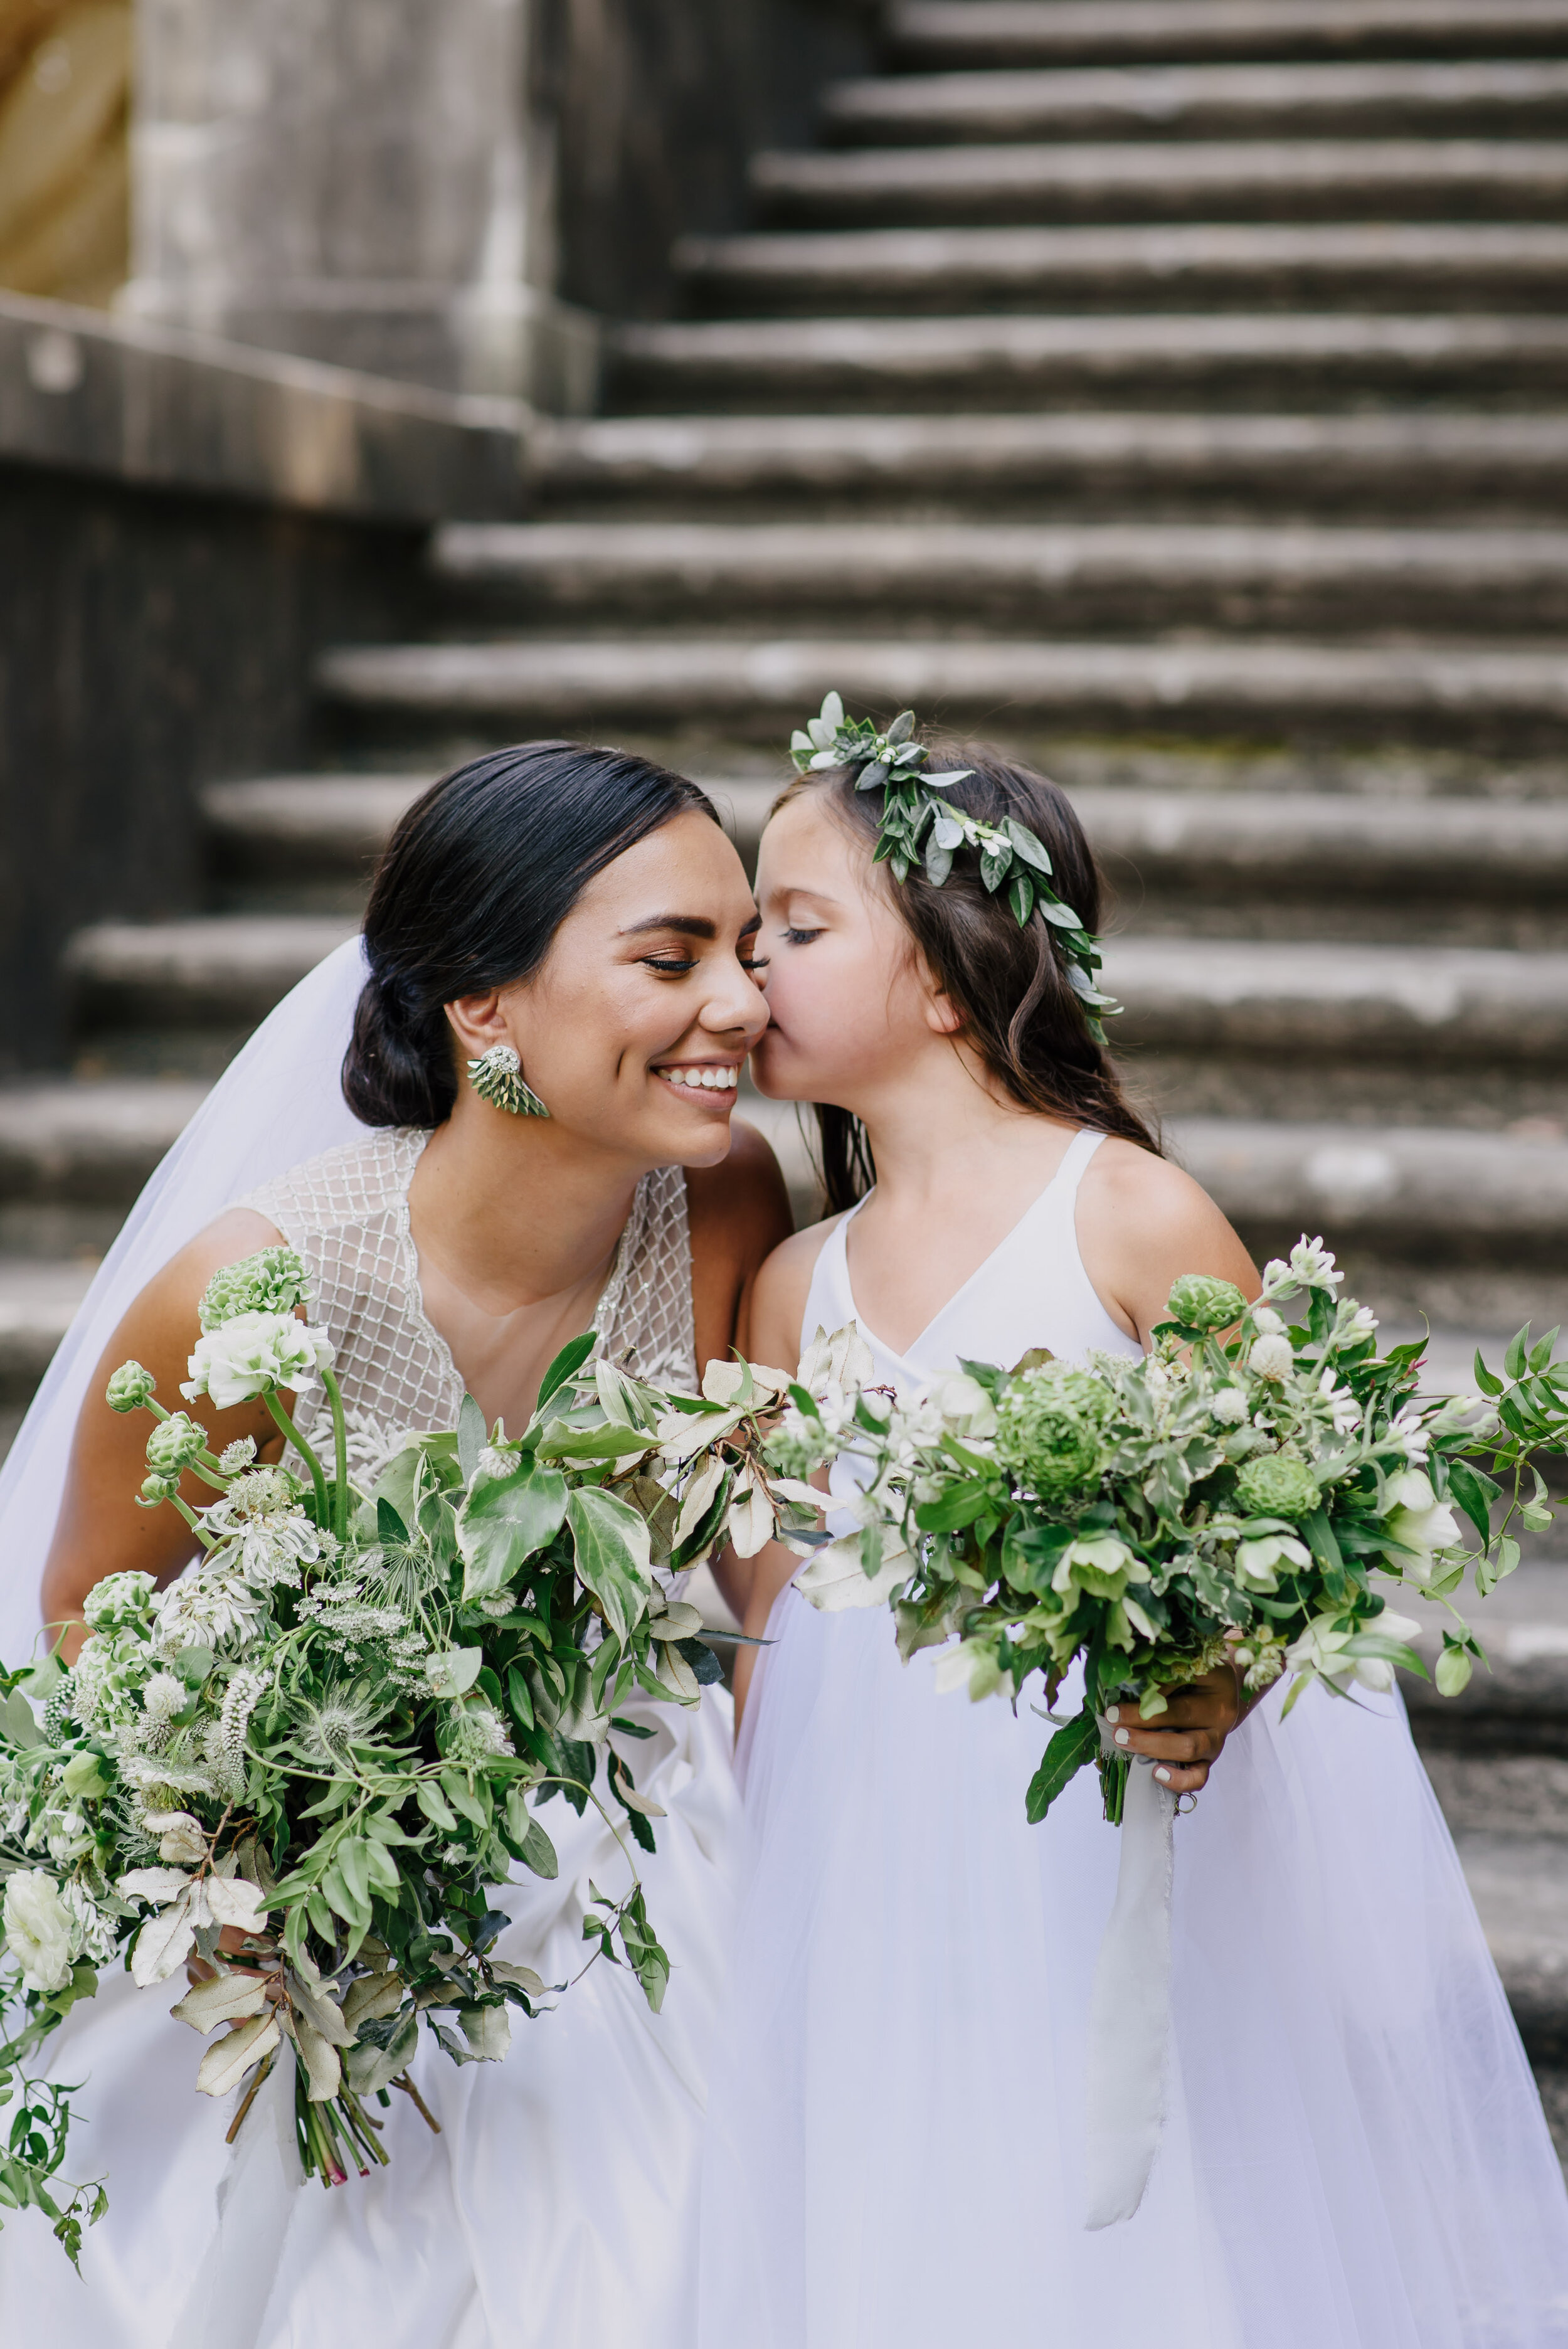 Bride and Flower Girl with Flower Crown | Simply Charming Socials | Atlanta Wedding Planner